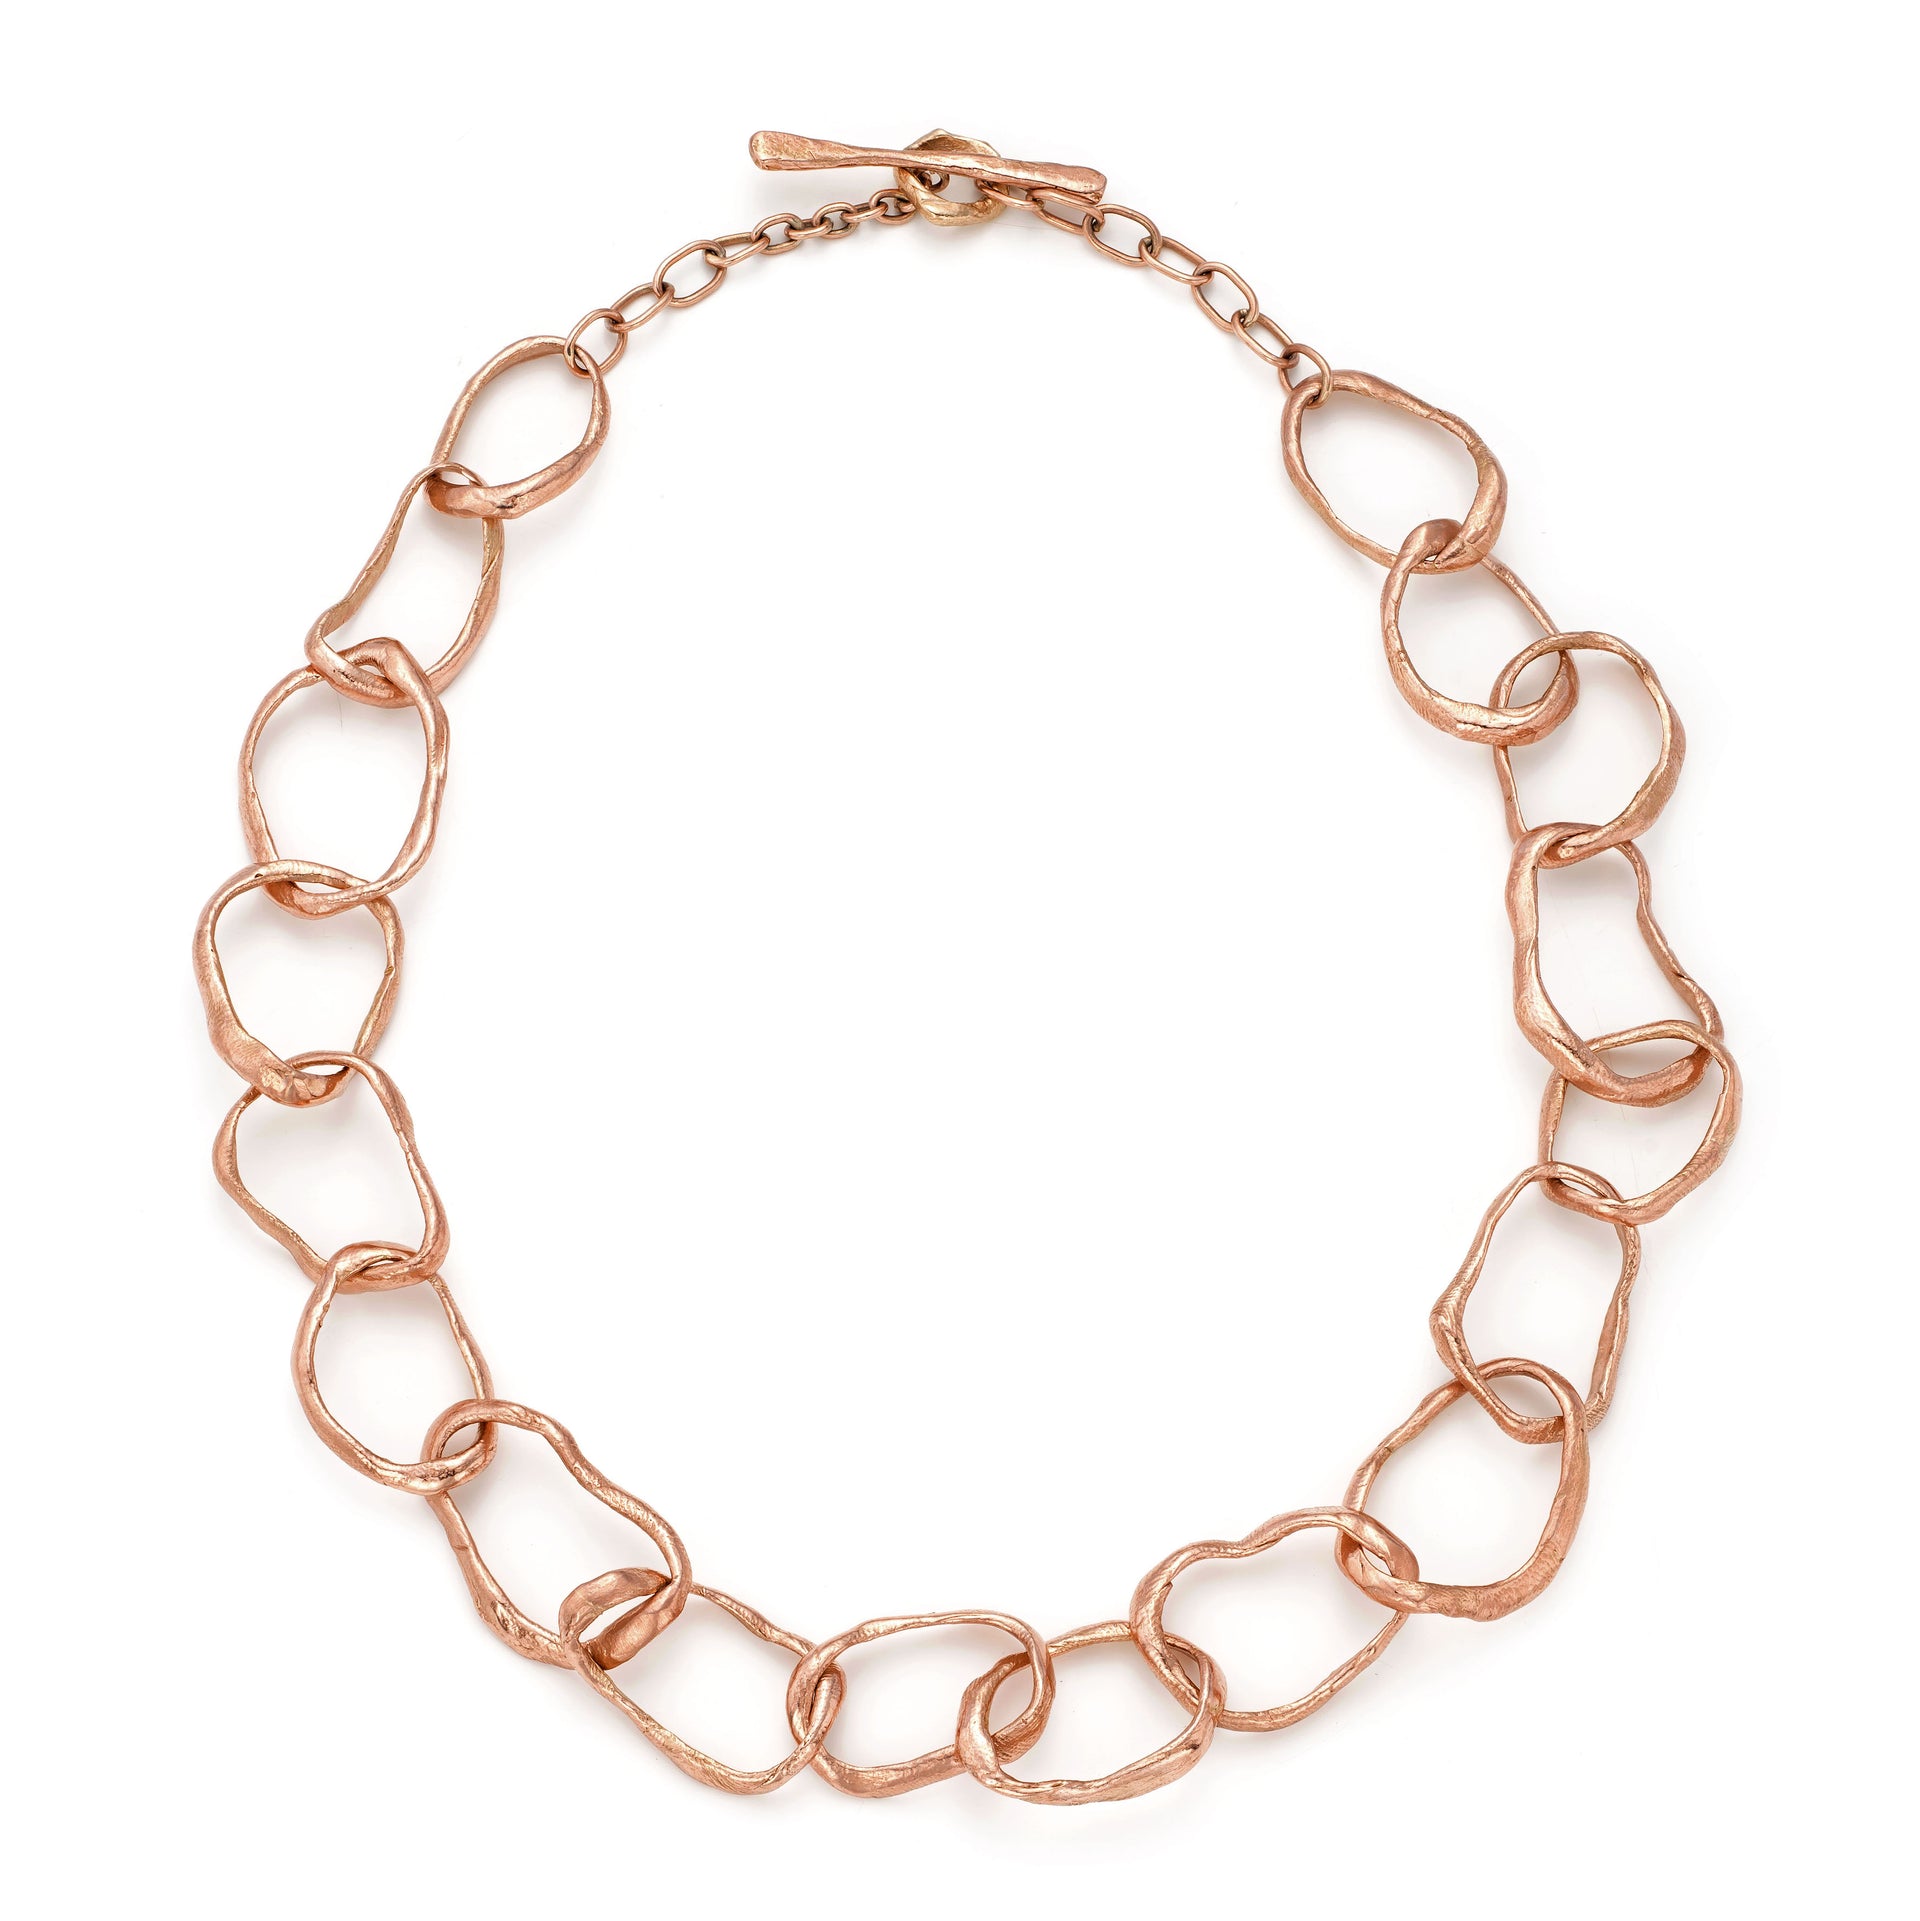 Unconventional rose gold chain necklace by Cornwall jewellery designer Emily Nixon. Each irregular link has been handmade to vary in size. The solid 9ct gold retains a rich lustre without being overly shiny. The necklace can be worn at different lengths: neck choker or longer. Emily’s signature sea worn finish gives the impression of sea tumbled treasure, jewellery handmade in Cornwall, made tactile by the tide. 